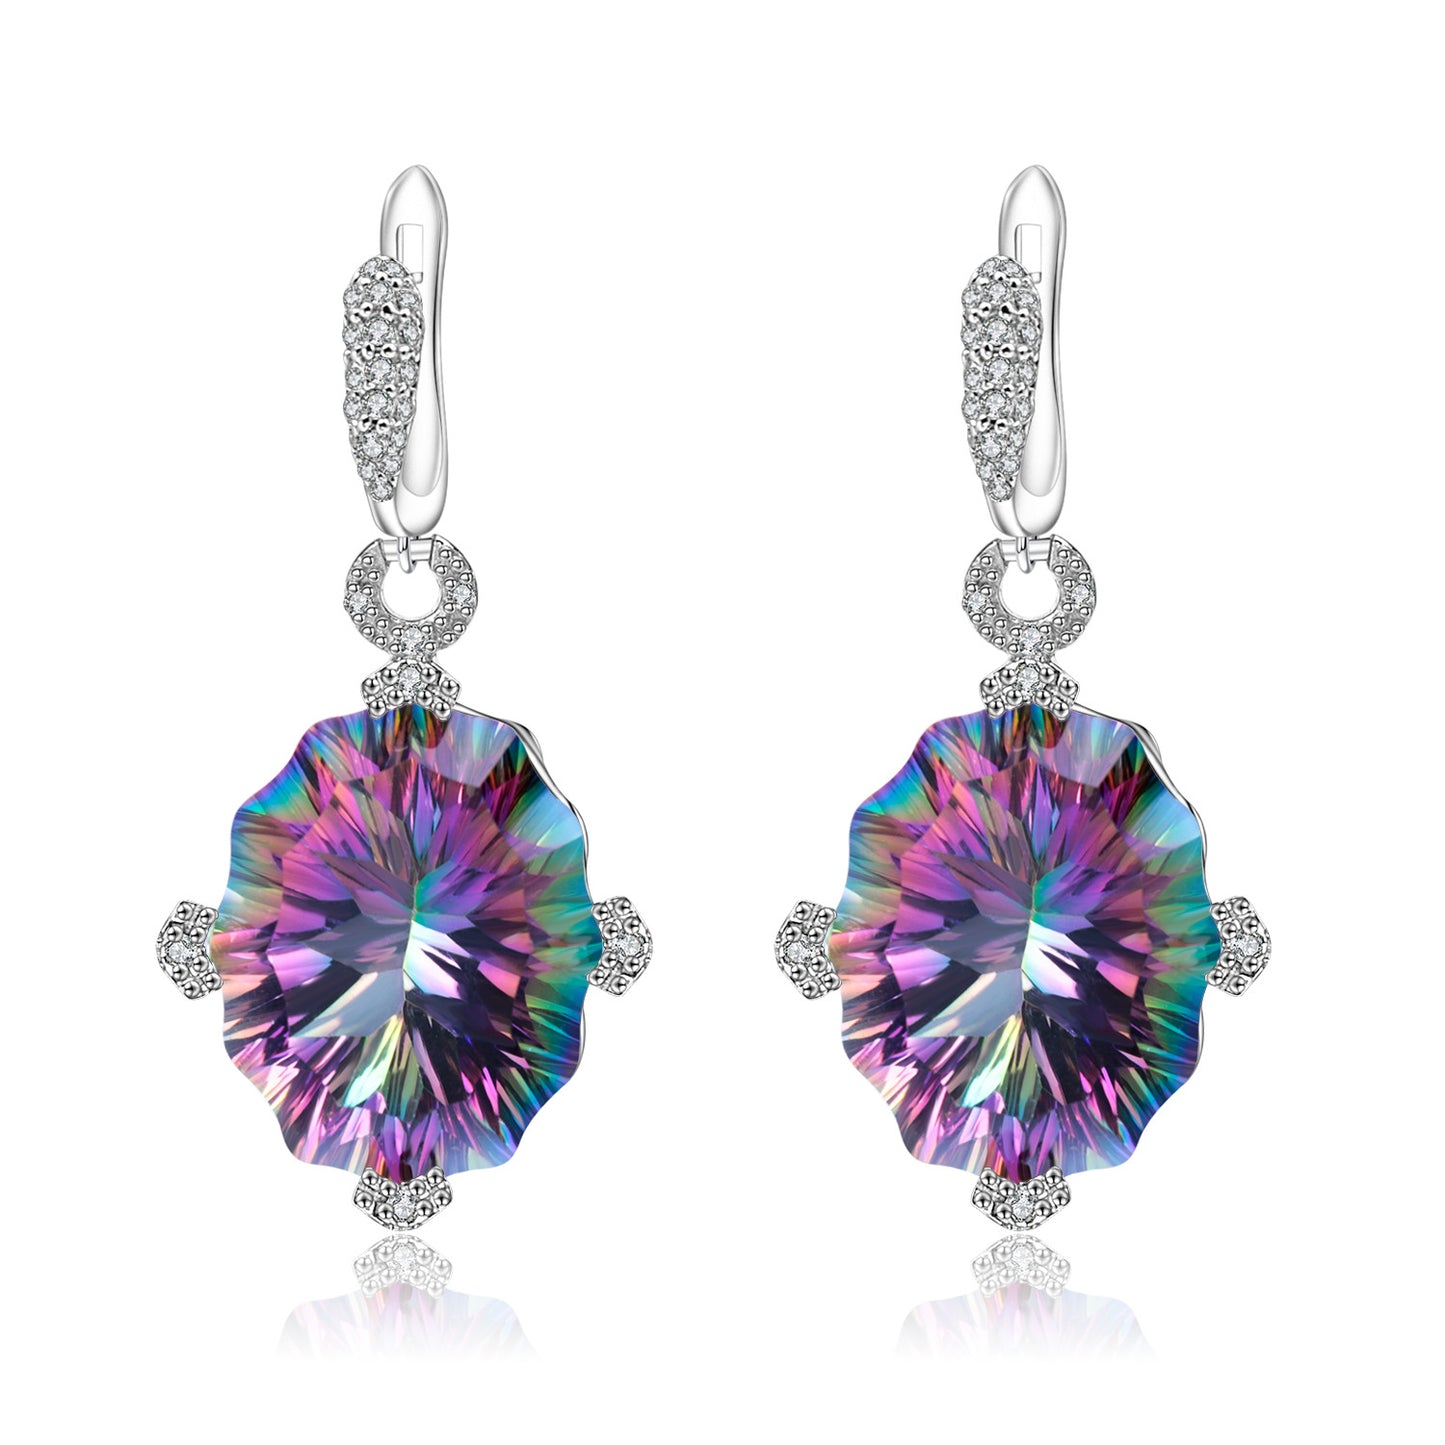 Crystal Special Oval Shaped Silver Drop Earrings for Women